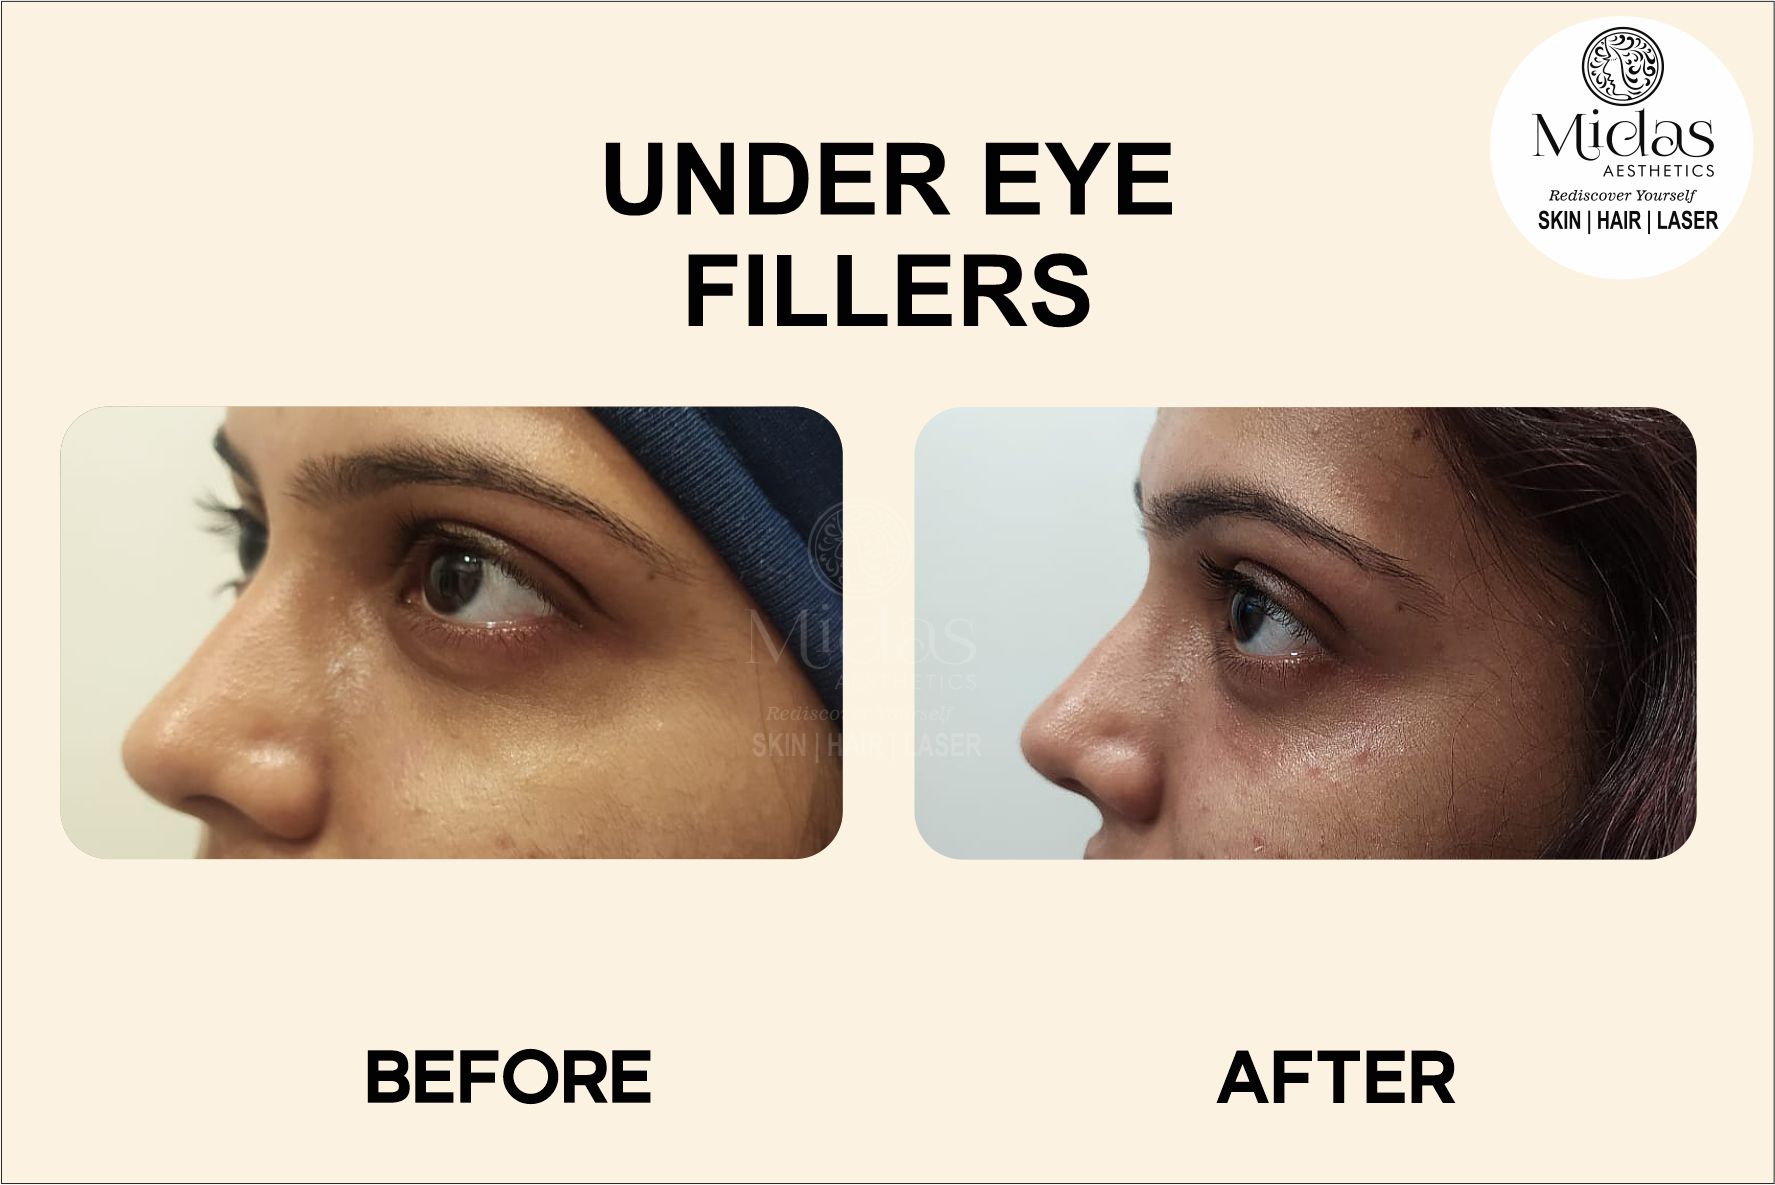 Under eye fillers treatment before and after images